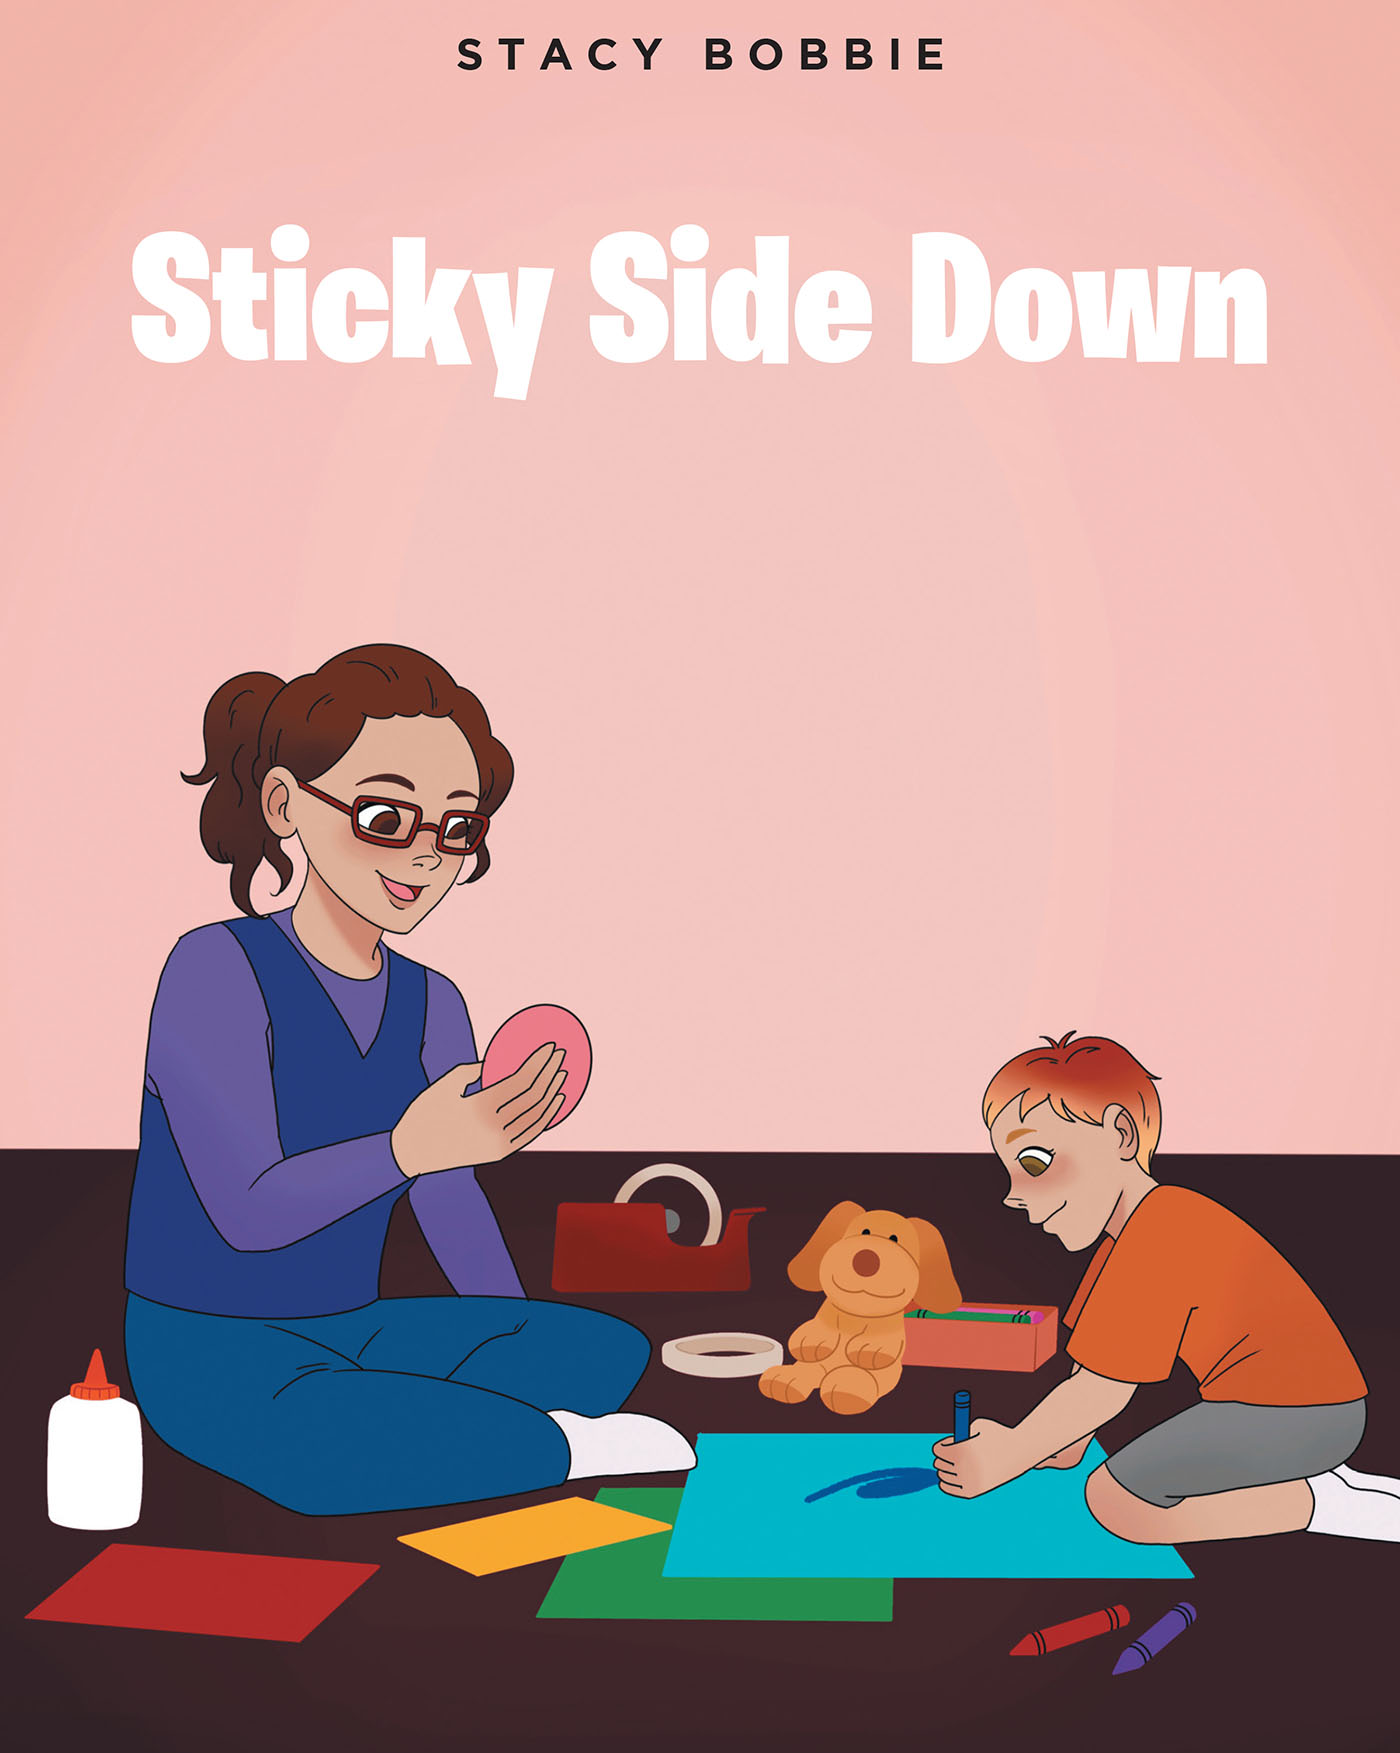 Stacy Bobbie’s New Book, "Sticky Side Down," Follows a Young Boy and His Mother Who Share a Tight Bond and Discuss Why Their Relationship is Like Tape and Paper